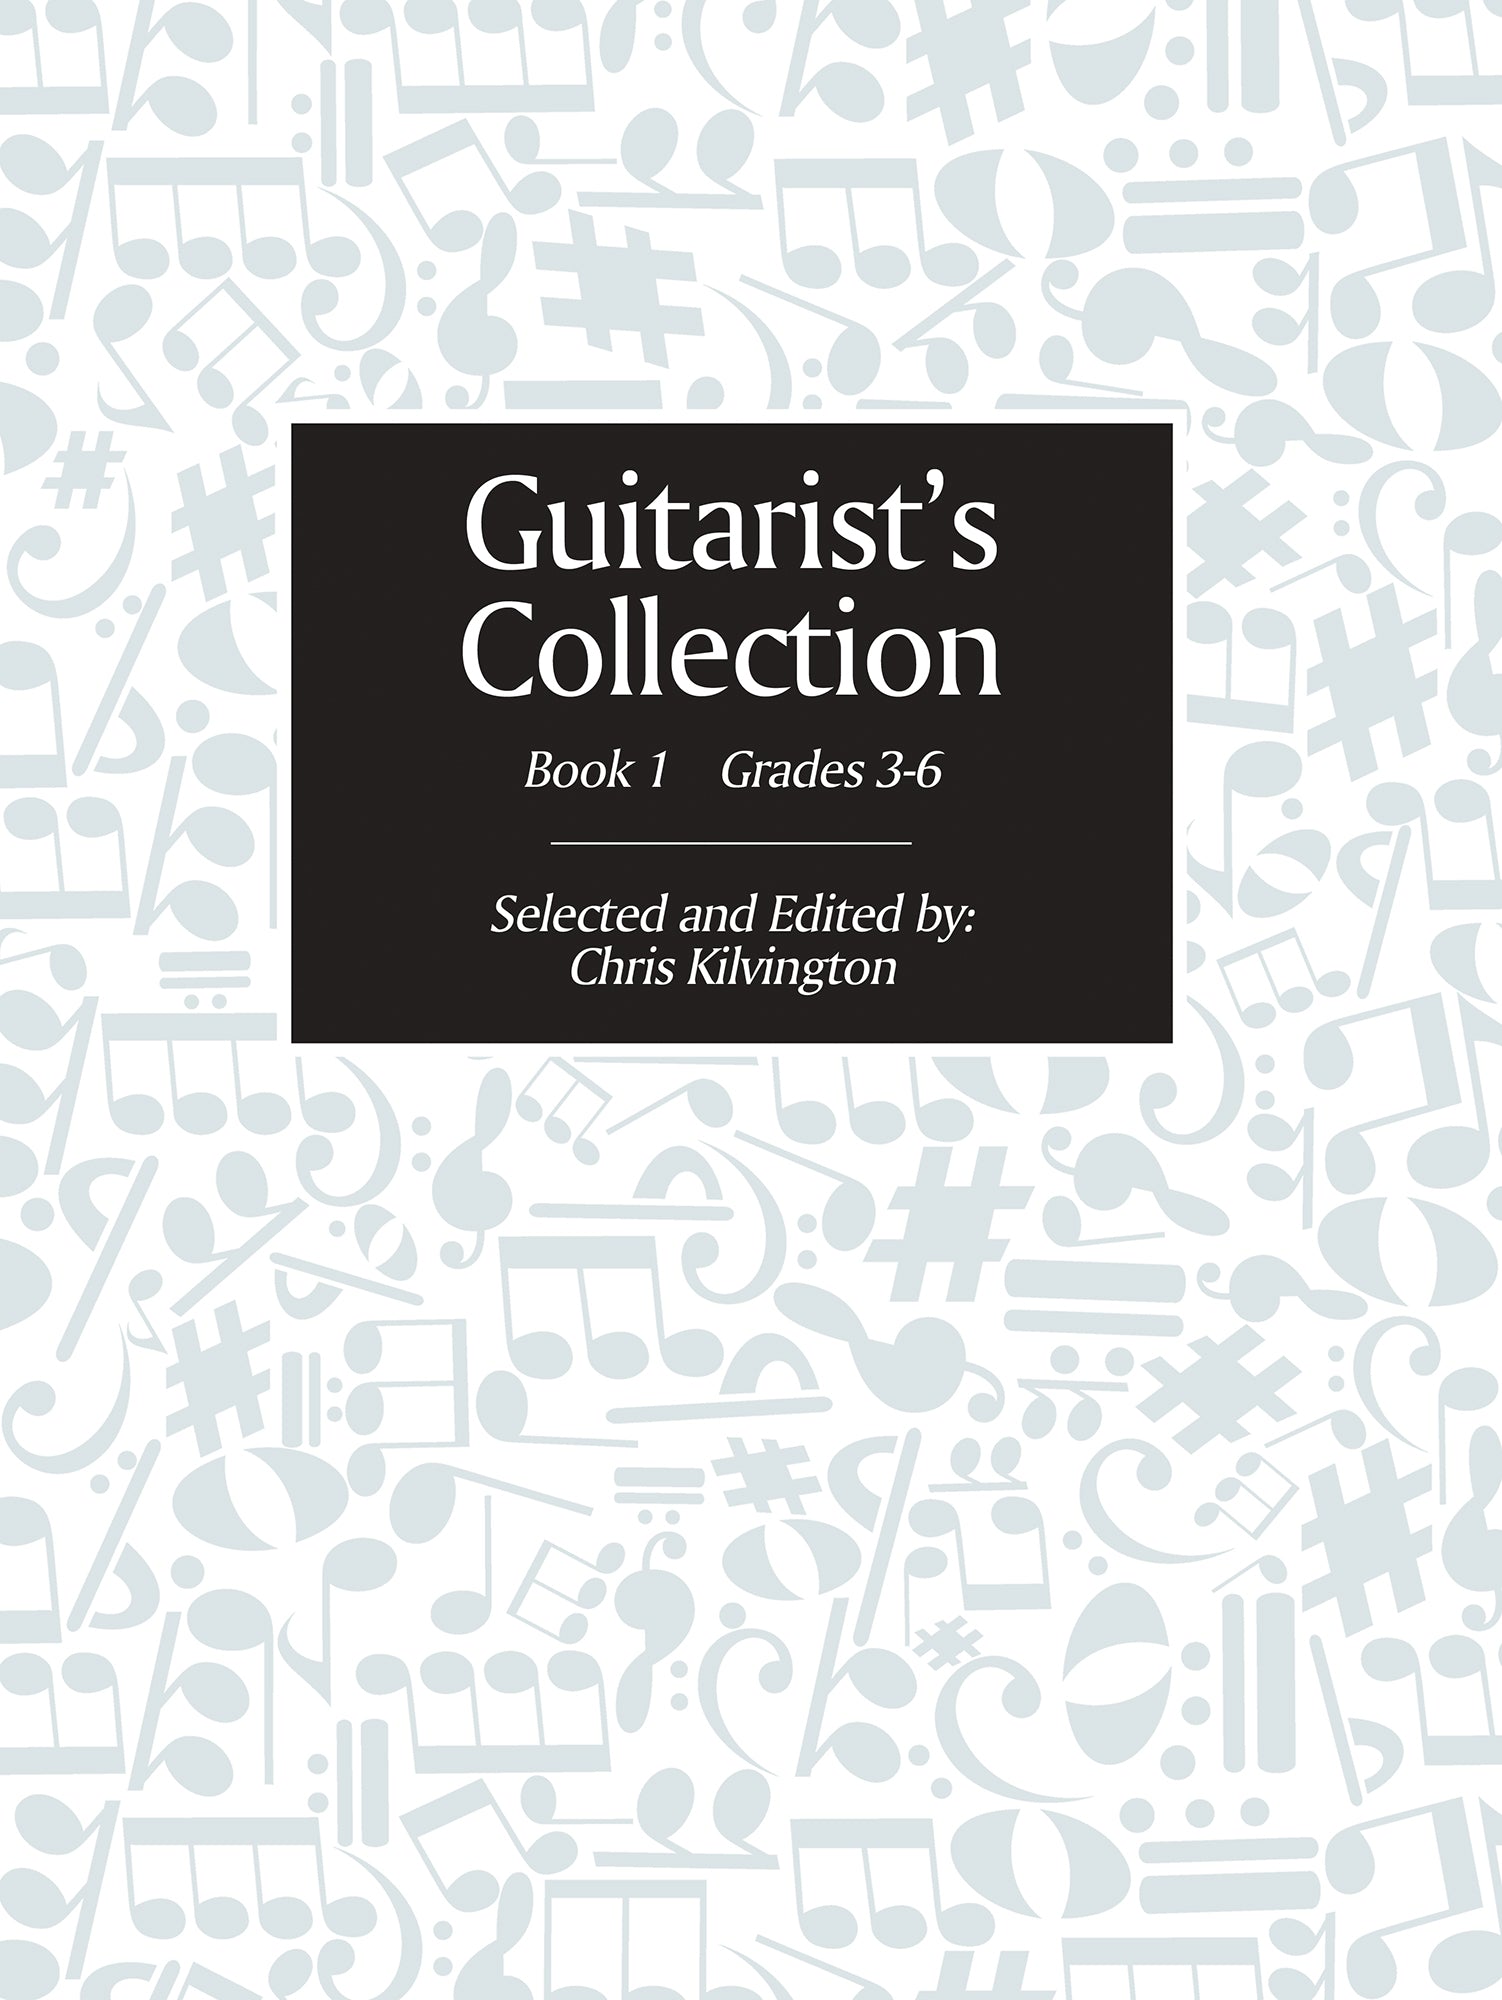 Guitarist's Collection Book 1